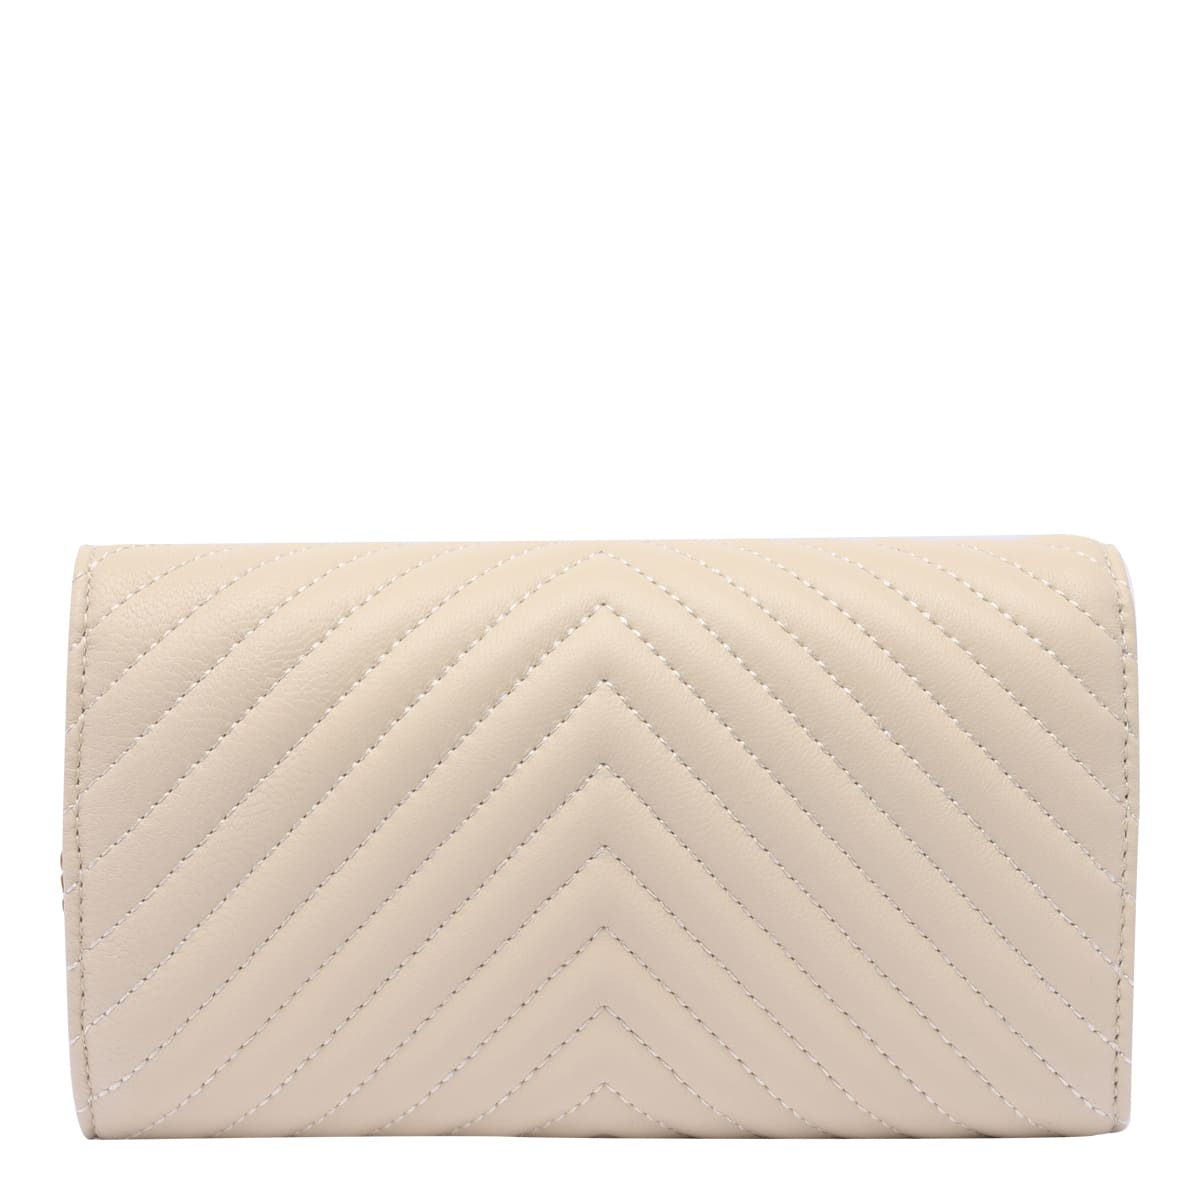 Shop Pinko Love Bag One Wallet In White